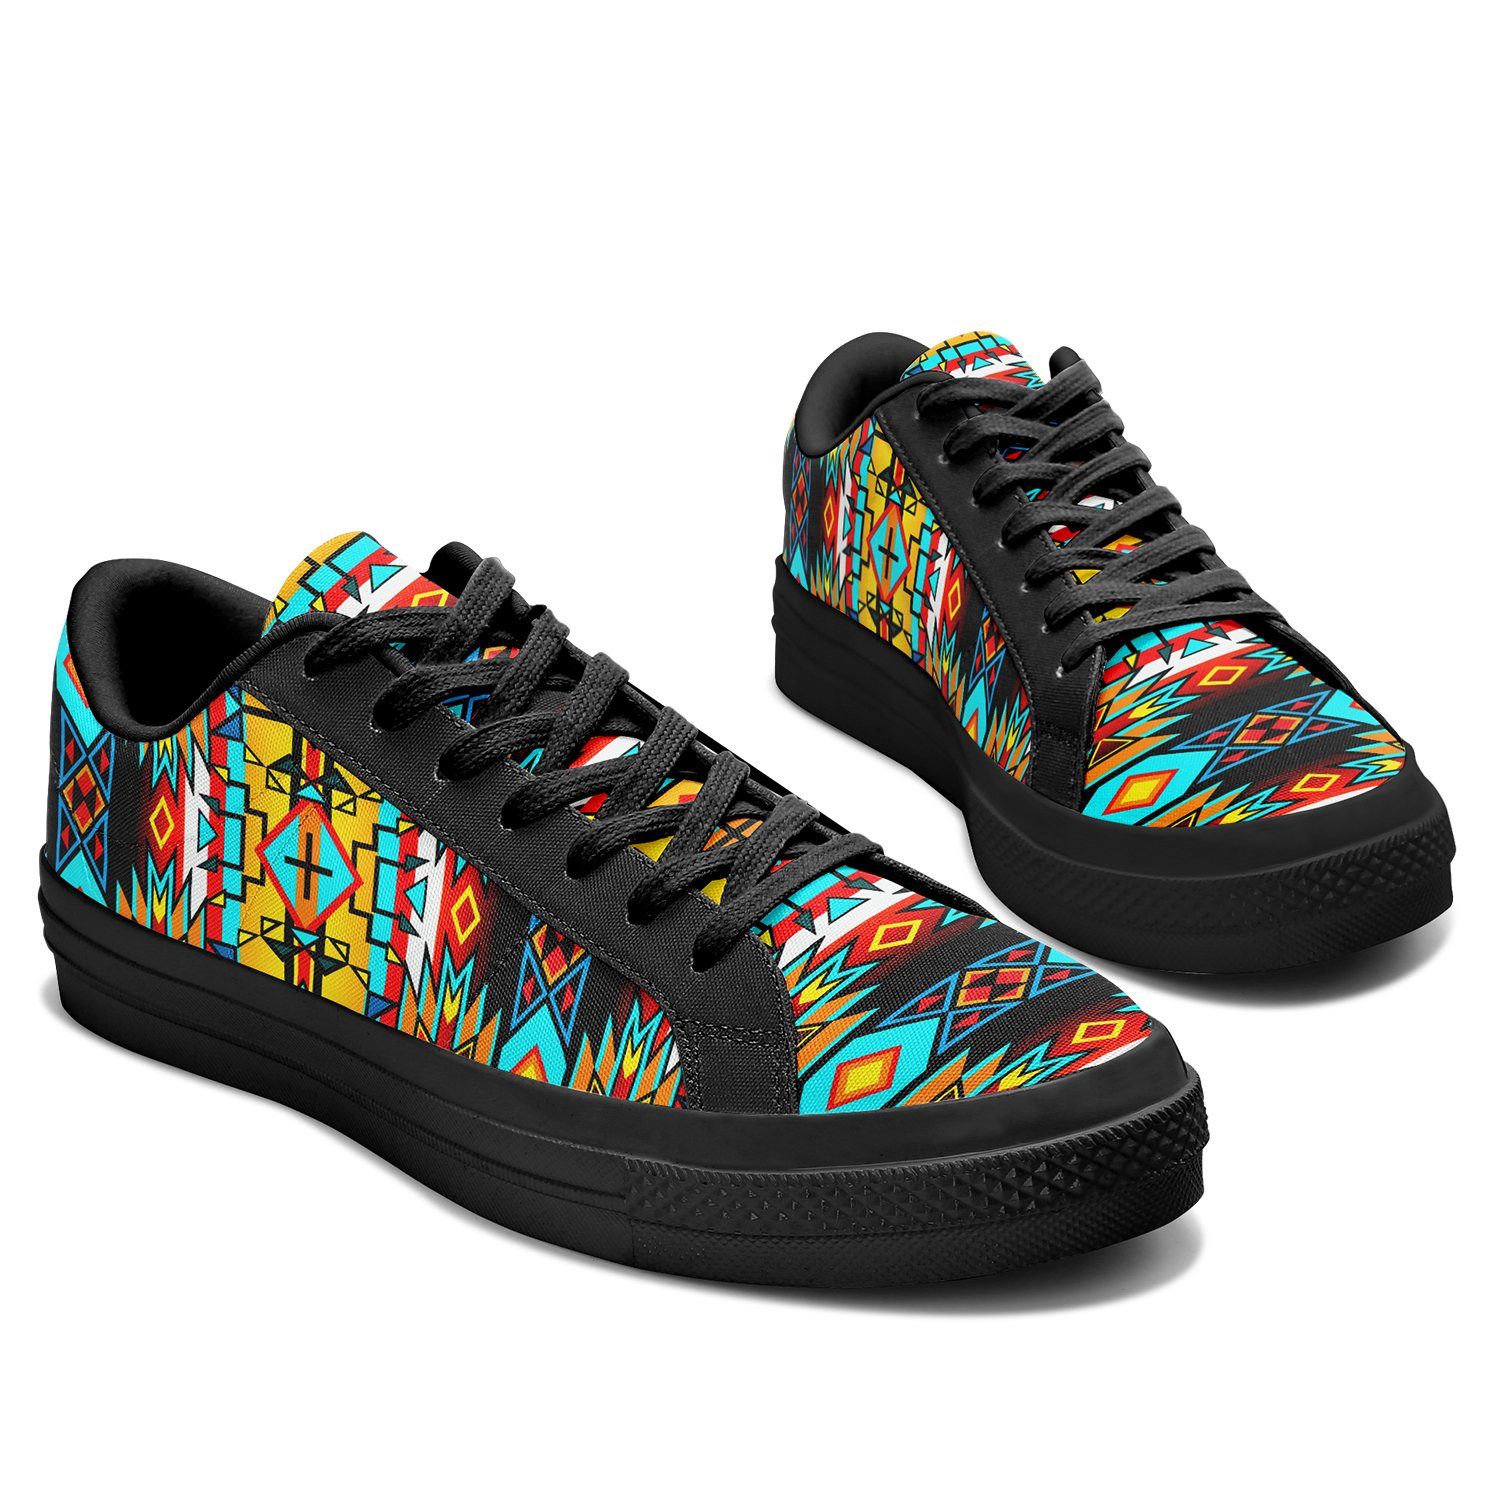 Force of Nature Twister Aapisi Low Top Canvas Shoes Black Sole 49 Dzine 